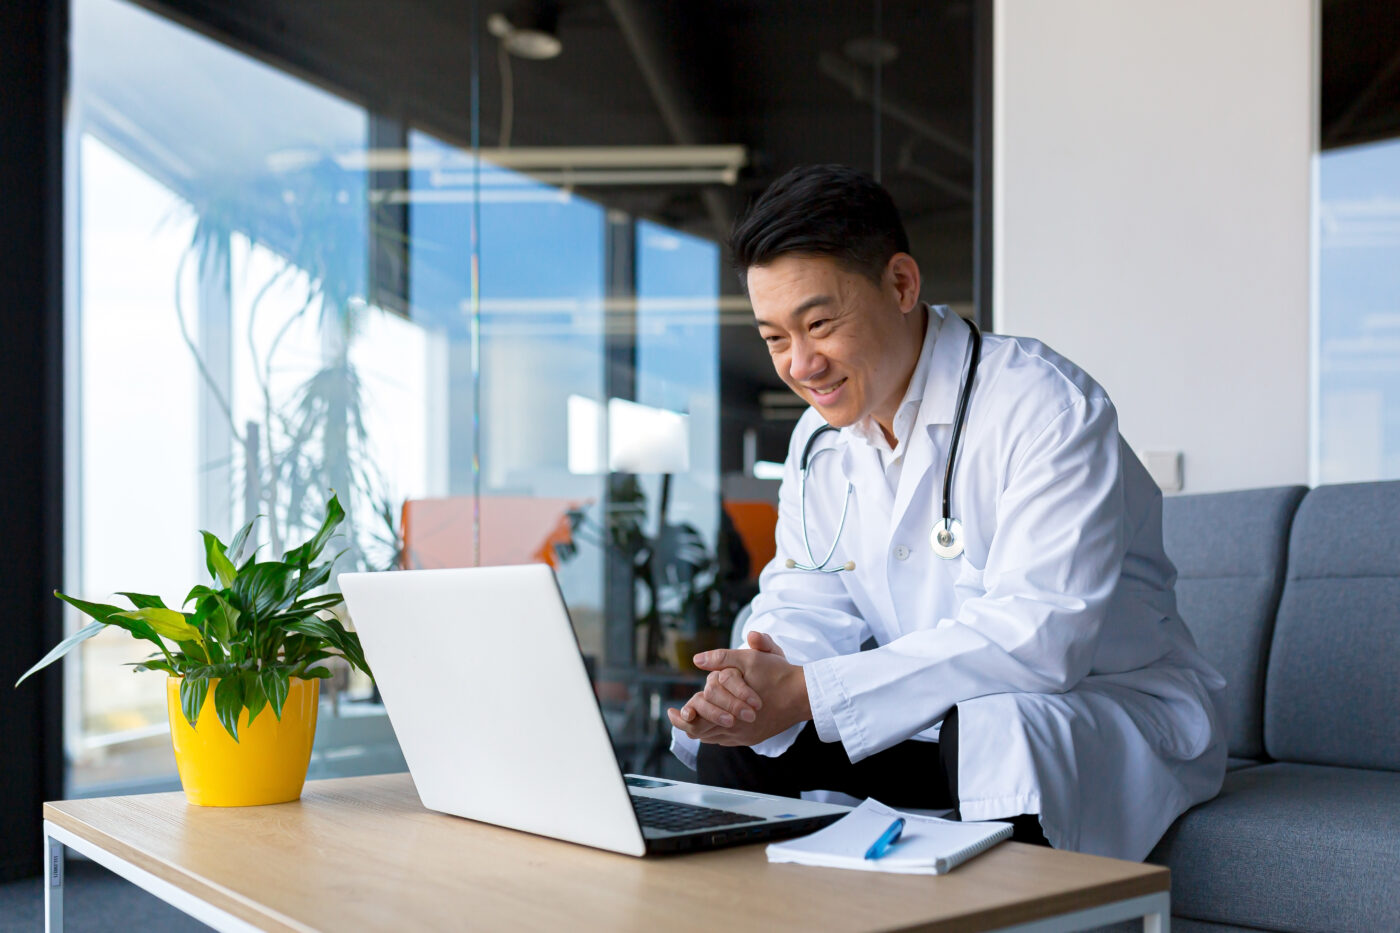 5 Trends Shaping the Future of Telemedicine